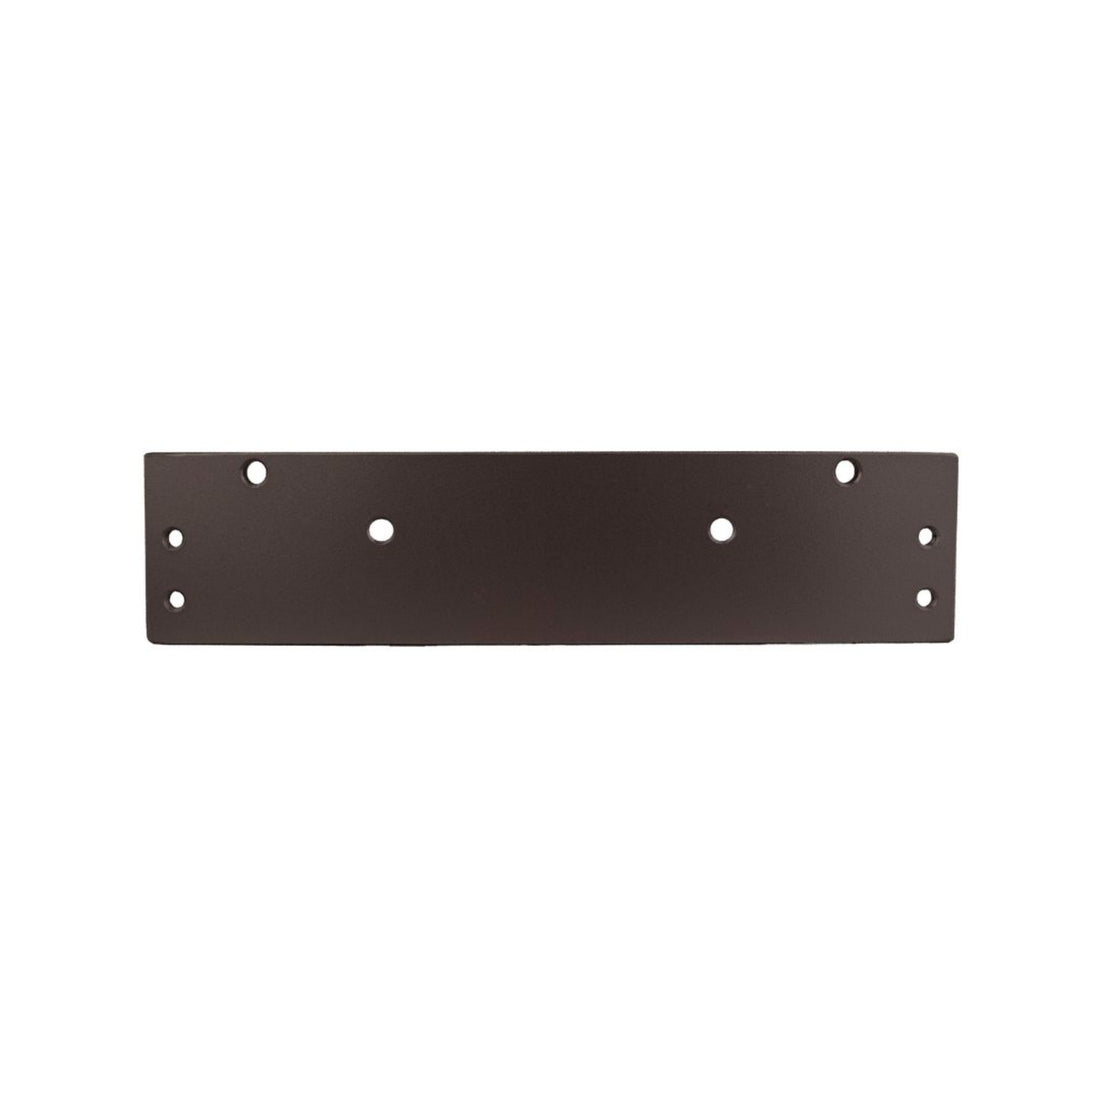 Parallel Arm Mount Compatible Drop Plate for 4300 Series -  Pro-Edge HD